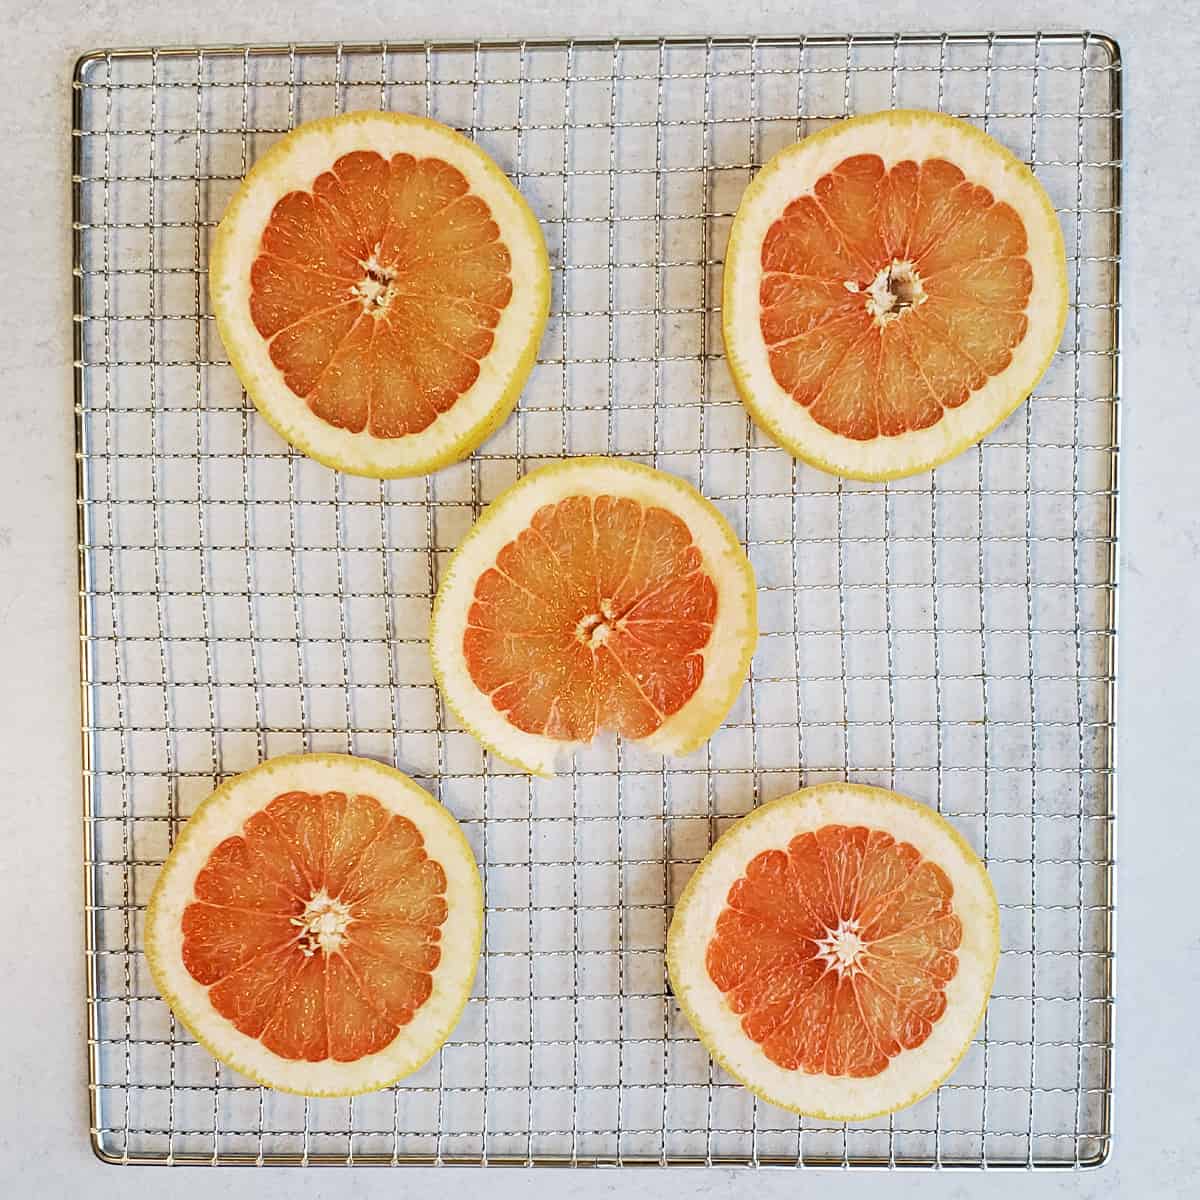 How to Dehydrate Grapefruit